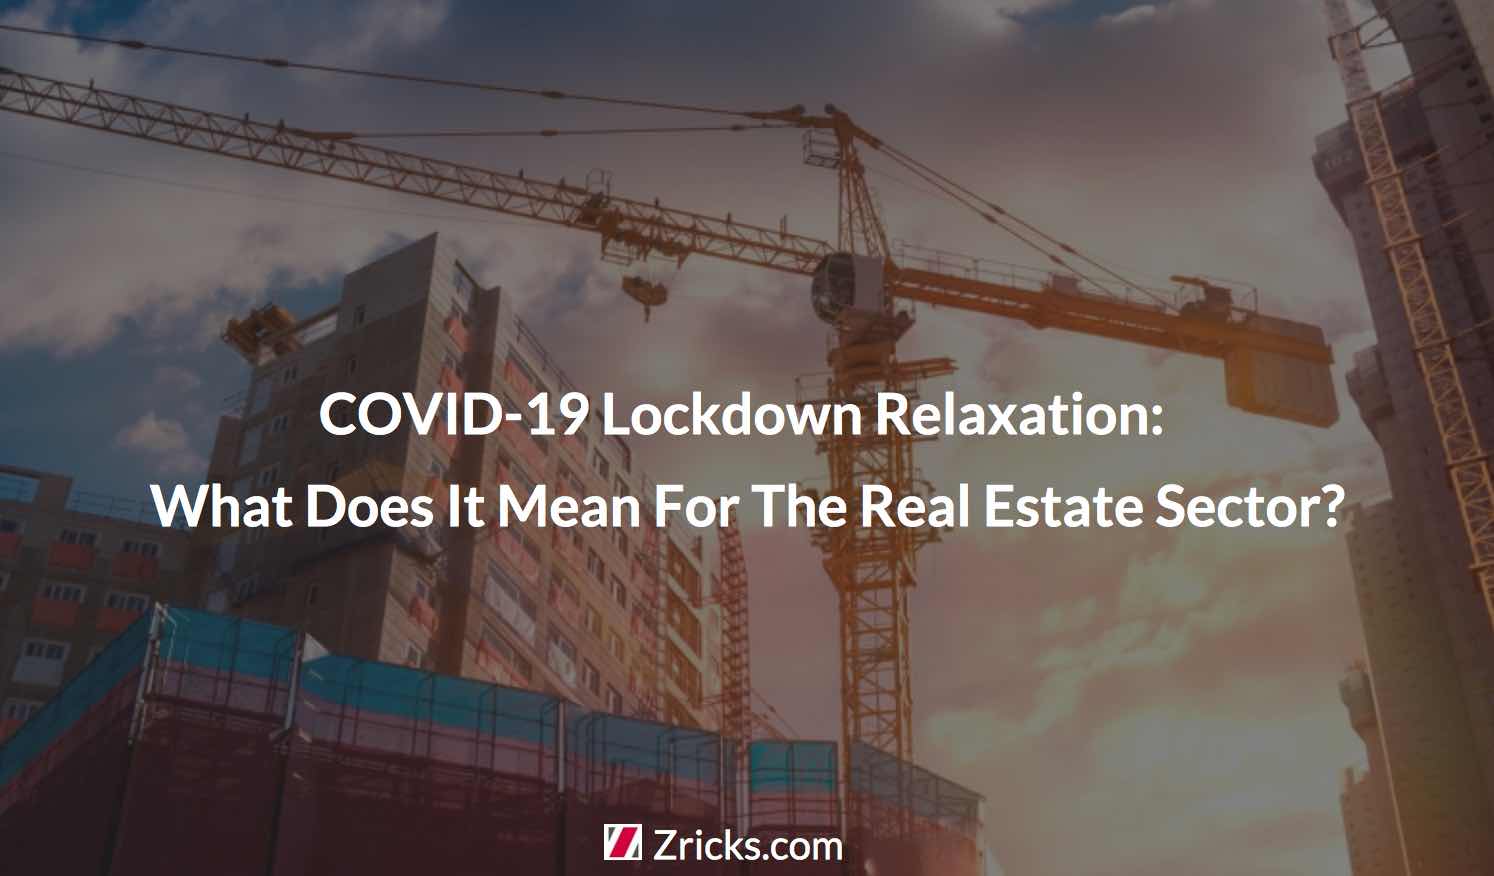 COVID-19 Lockdown Relaxation: What Does It Mean For The Real Estate Sector? Update